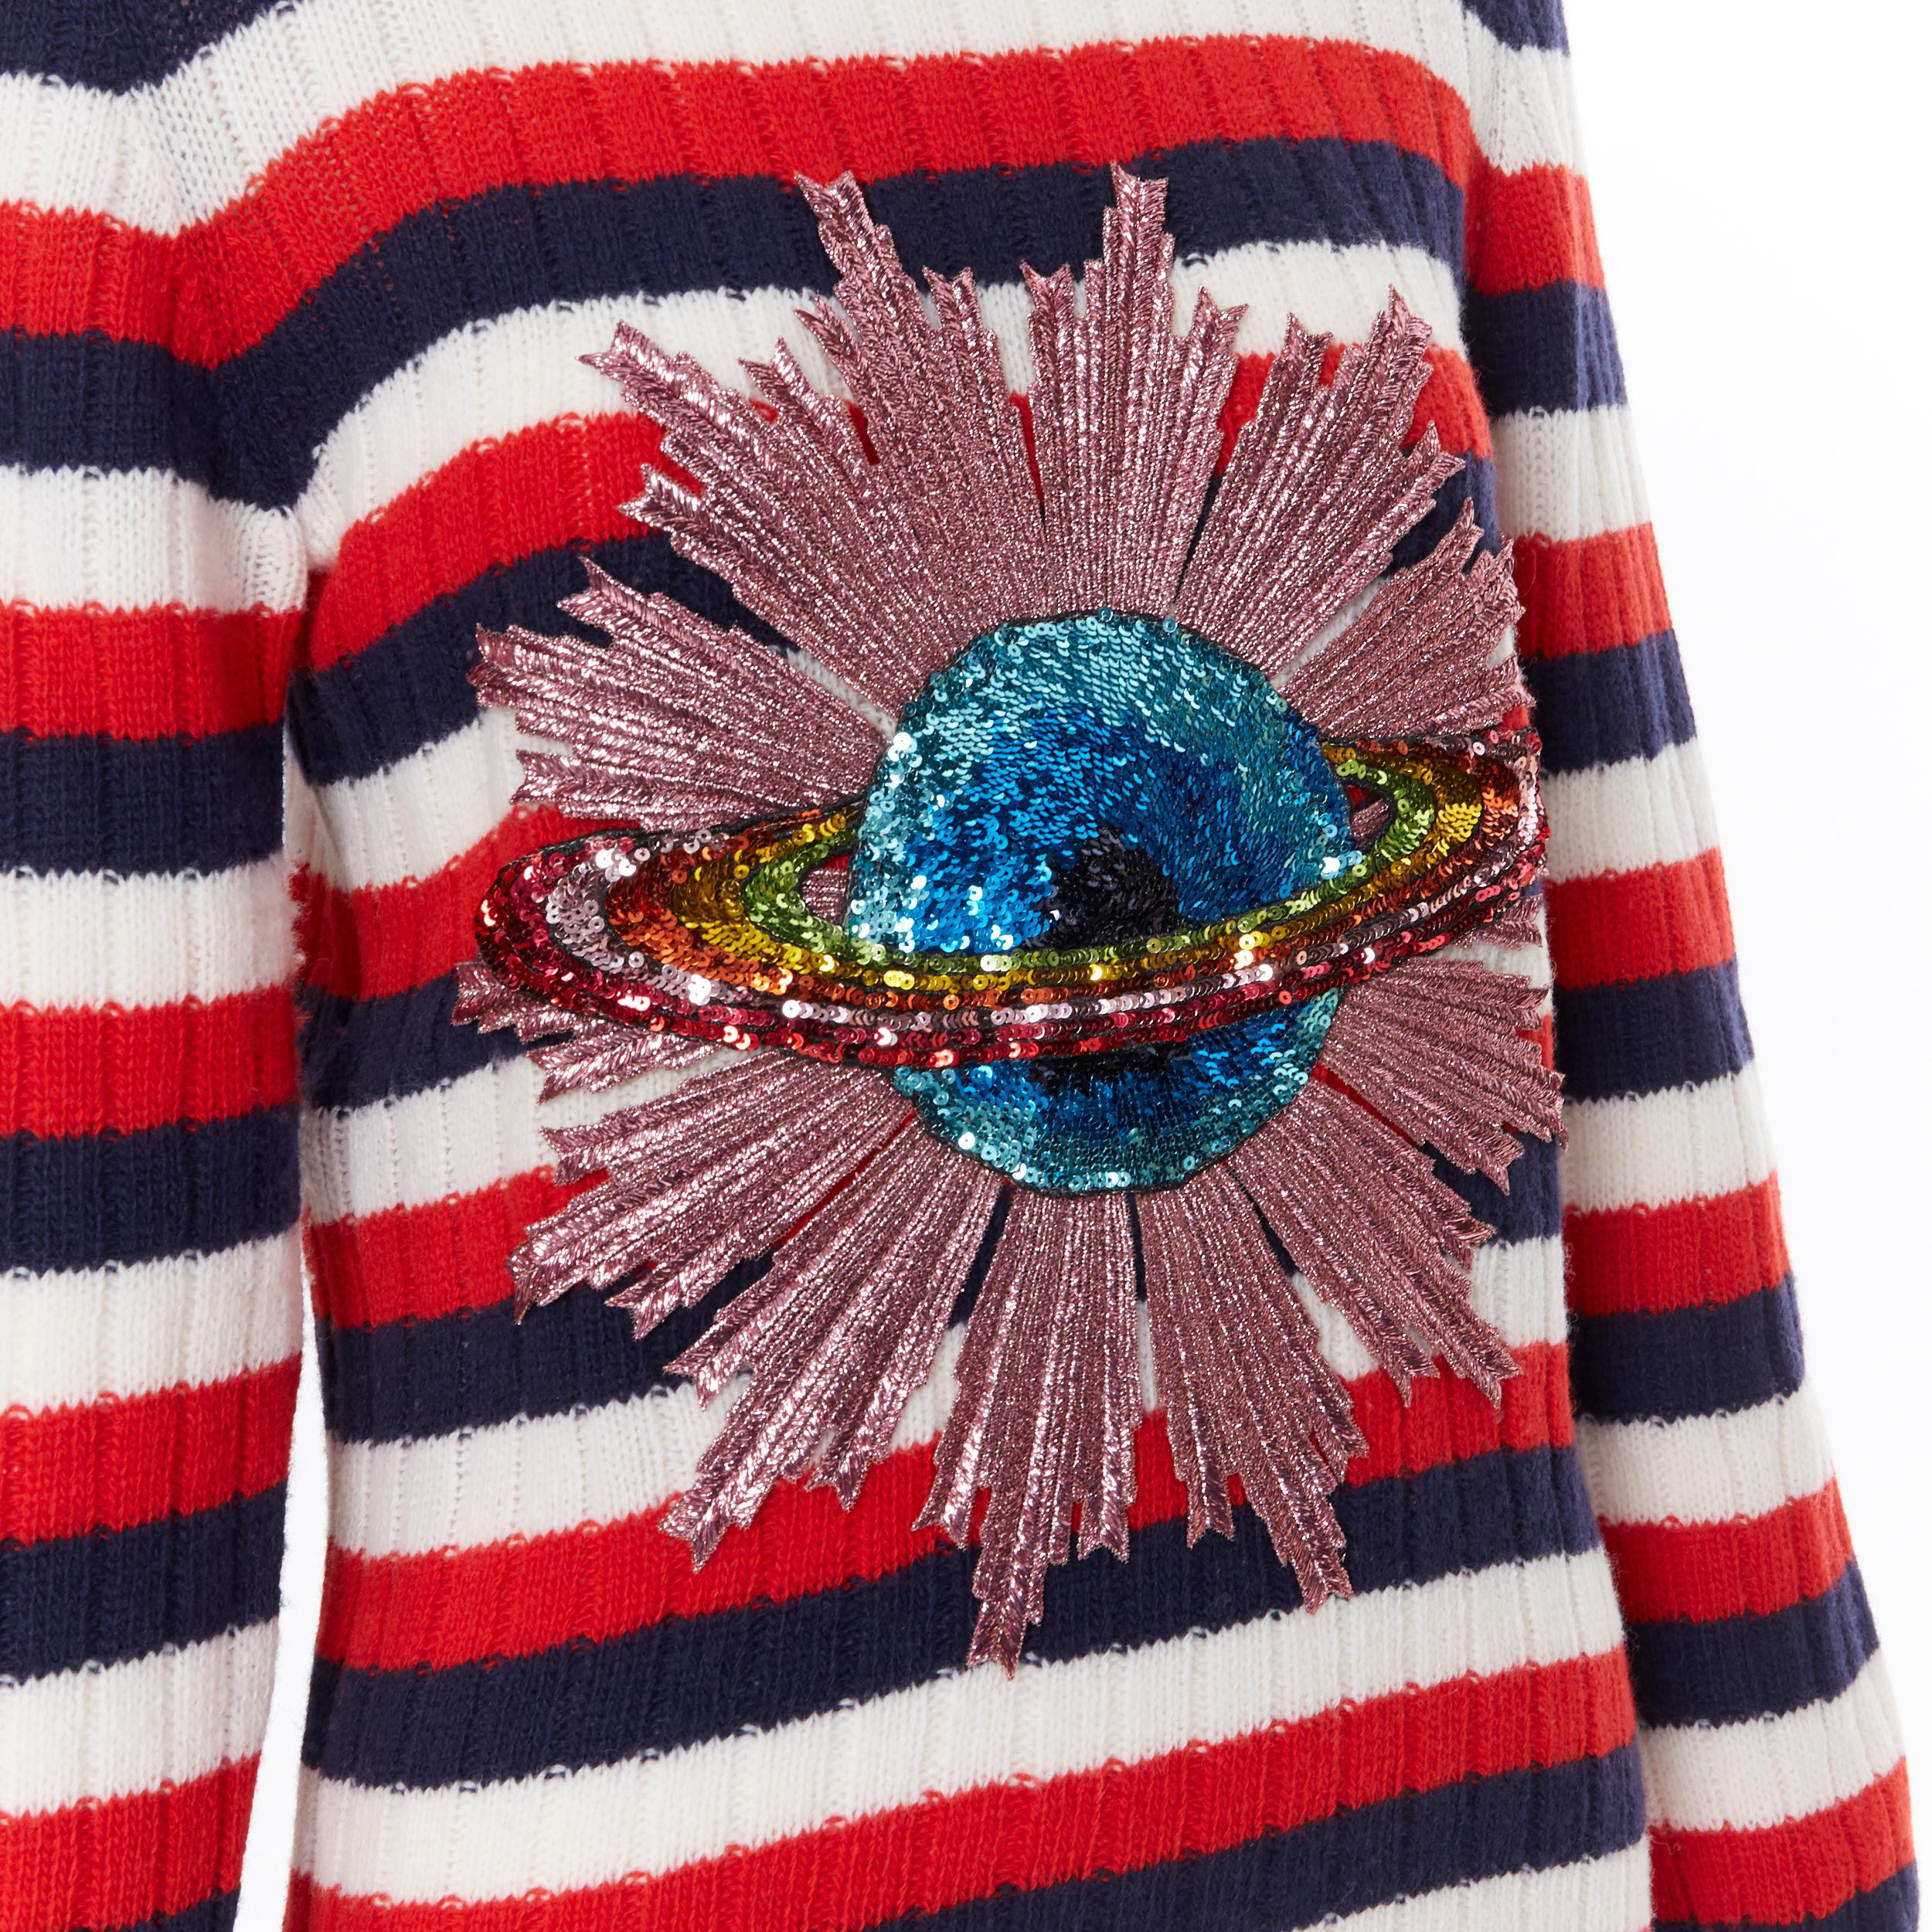 GUCCI MICHELE 100% wool red blue white striped UFO sequins embellished sweater M
Brand: Gucci
Designer: Alessandro Michele
Model Name / Style: Wool sweater
Material: Wool
Color: Multicolour
Pattern: Other; UFO 
Extra Detail: UFO sequins and pink